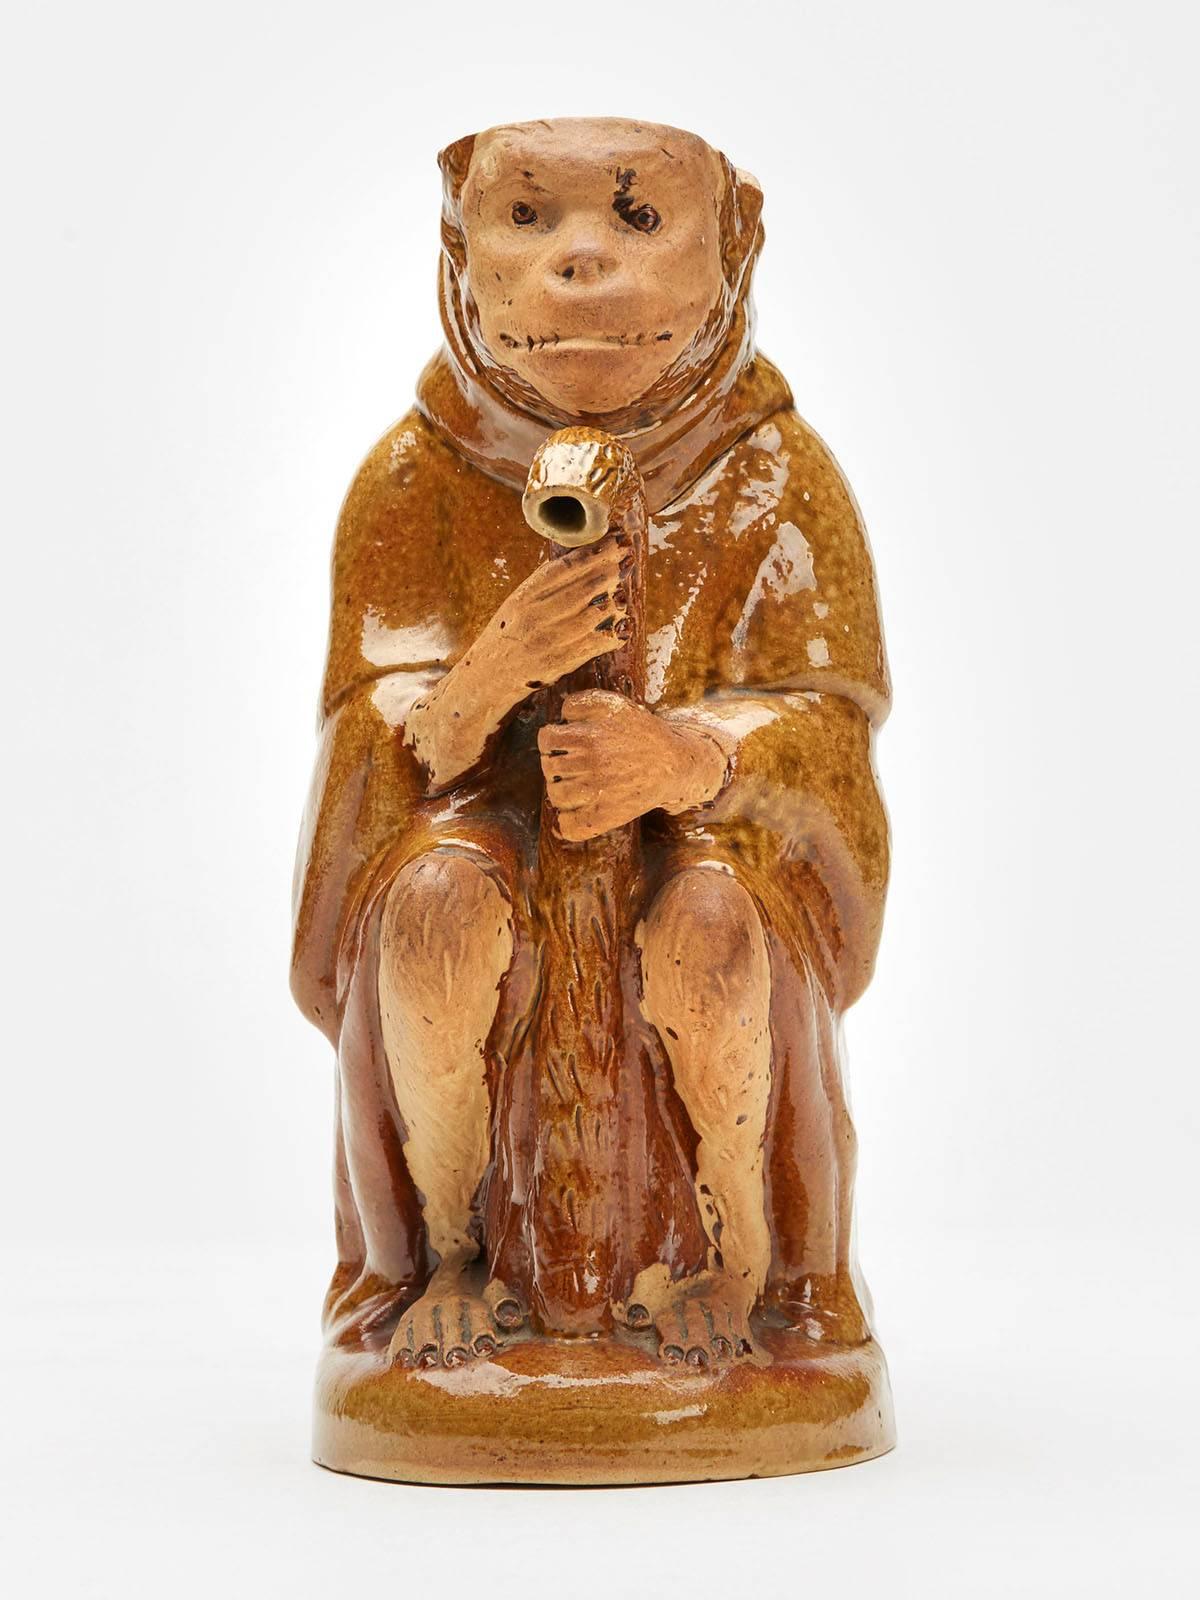 An unusual antique salt glazed pottery seated monkey teapot or jug portraying a monkey wearing a monks gown seated and resting on a walking stick which forms the spout. The monkey's tail forms a loop handle and is decorated in a brown salt glazed